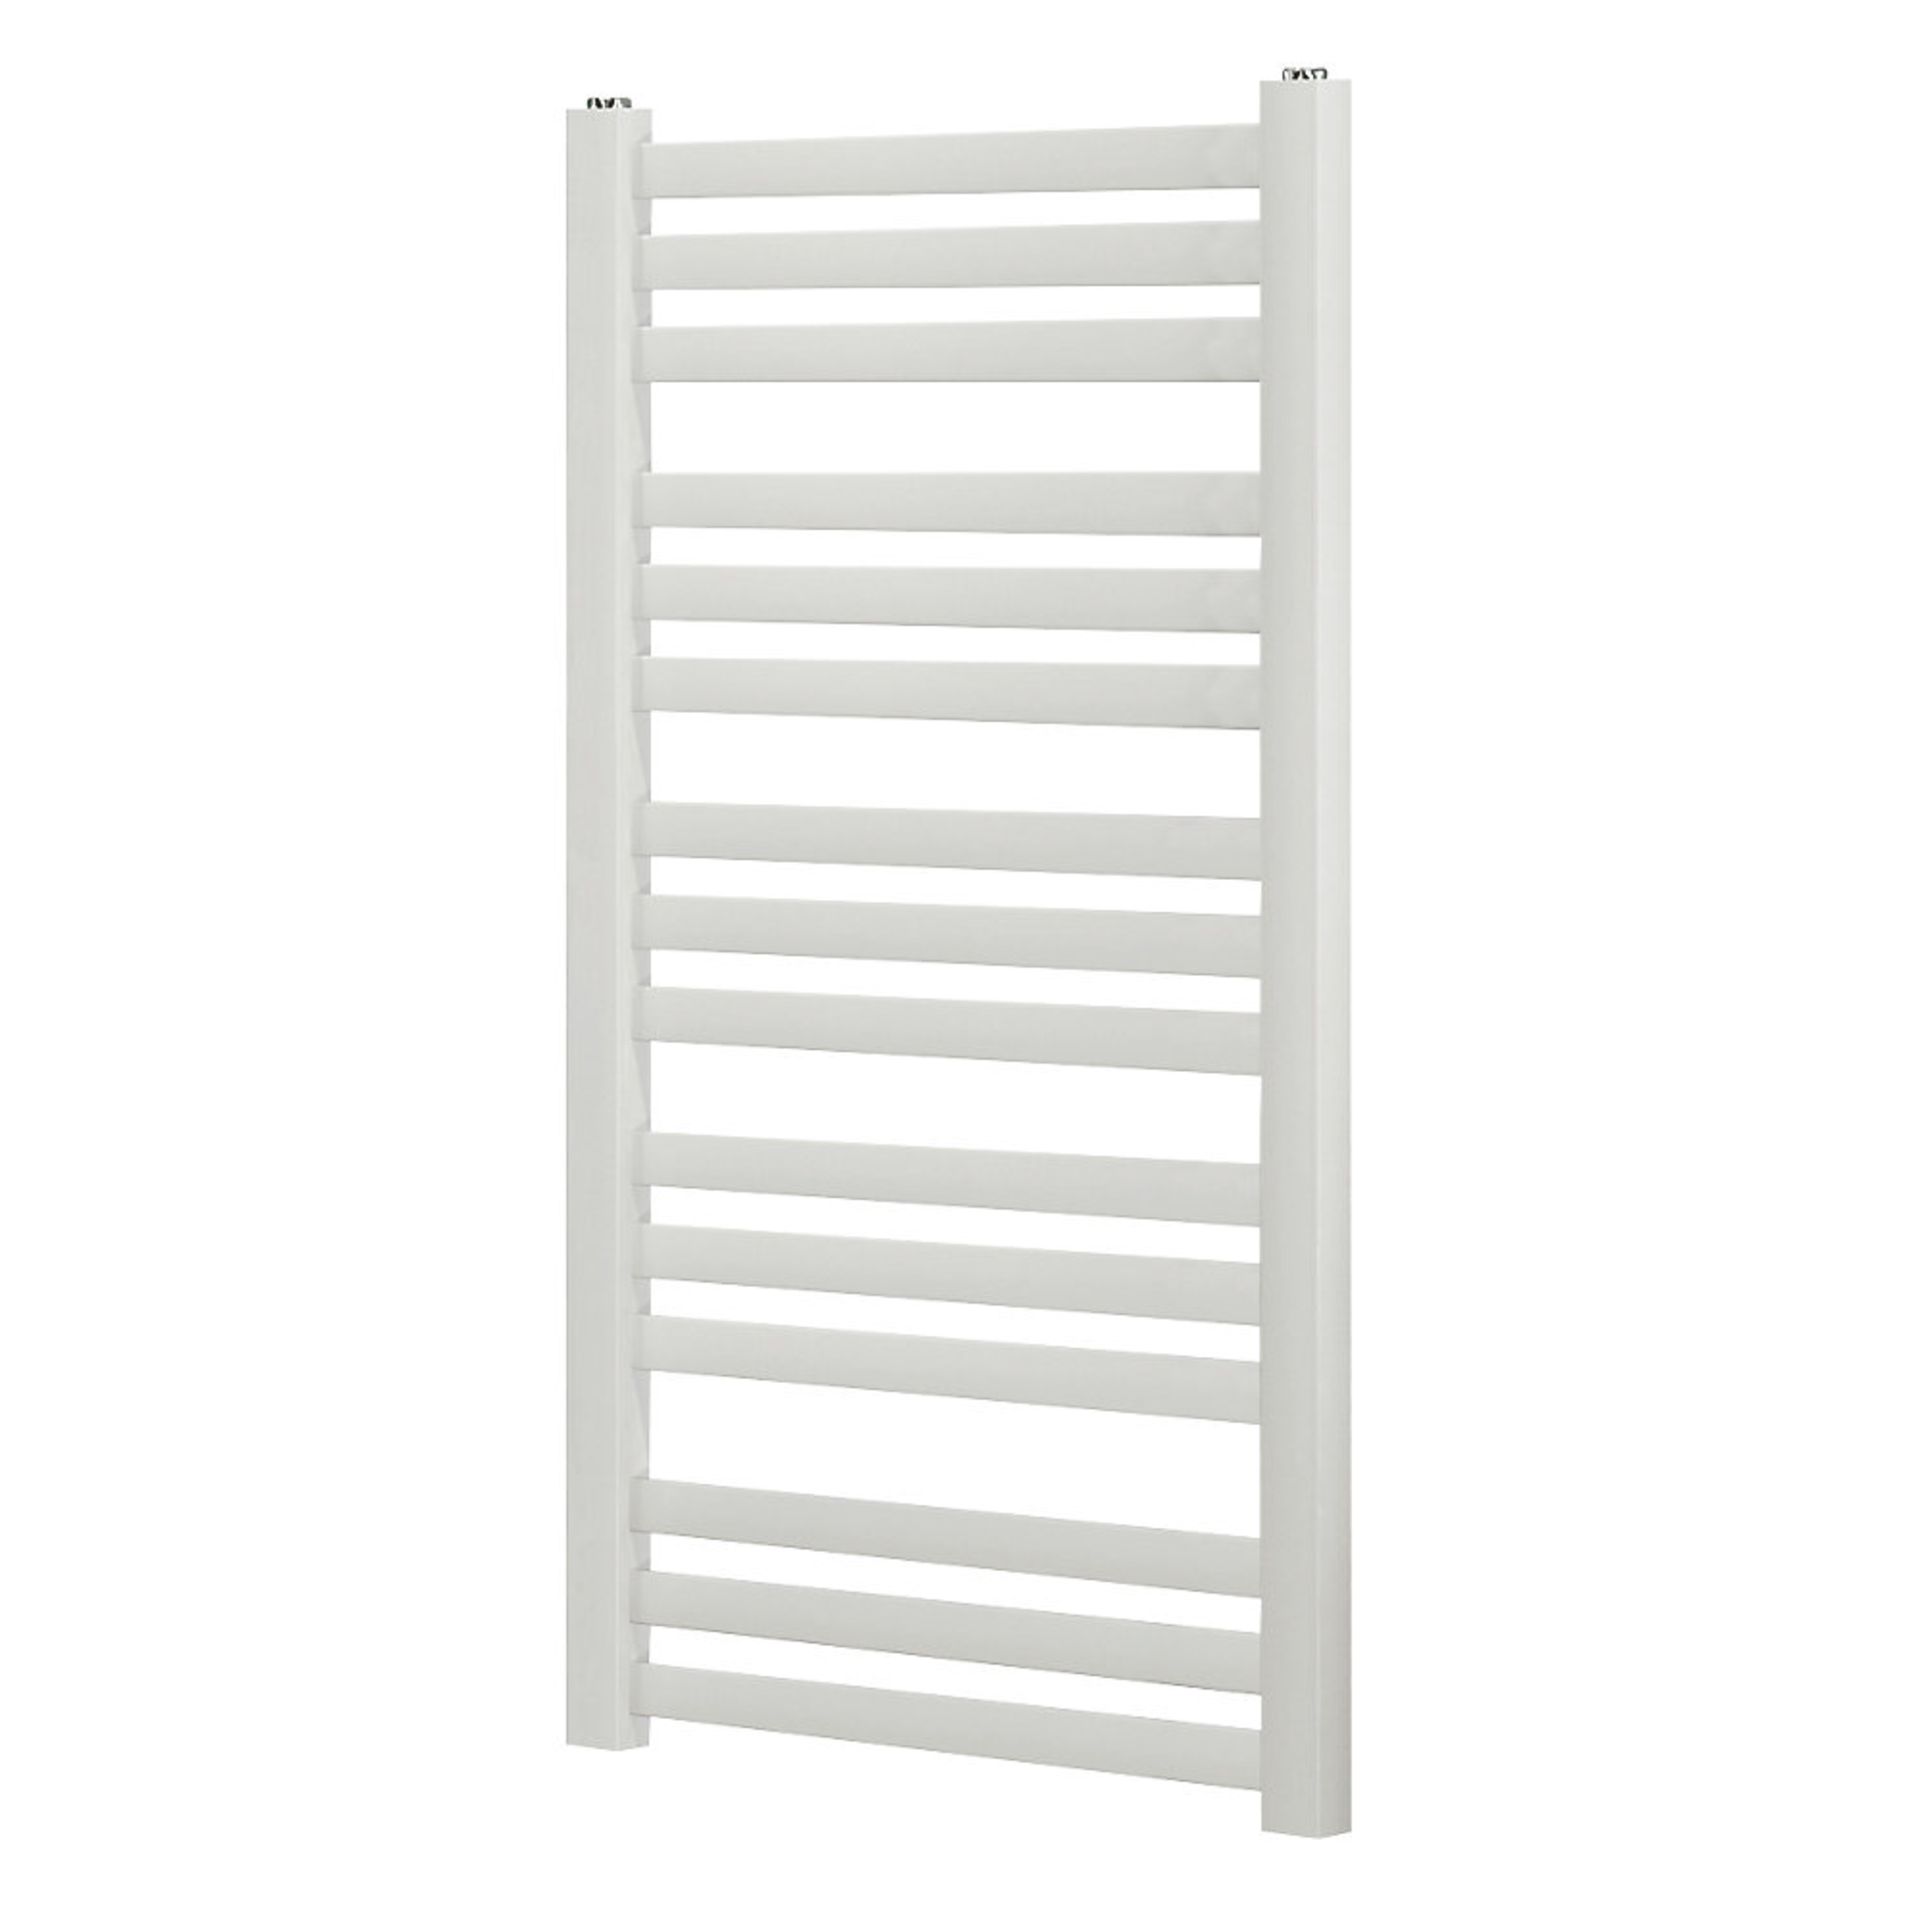 (H33) 900x450mm TOWEL RADIATOR 900 X 500MM WHITE. High quality powder-coated steel construction... - Image 3 of 4